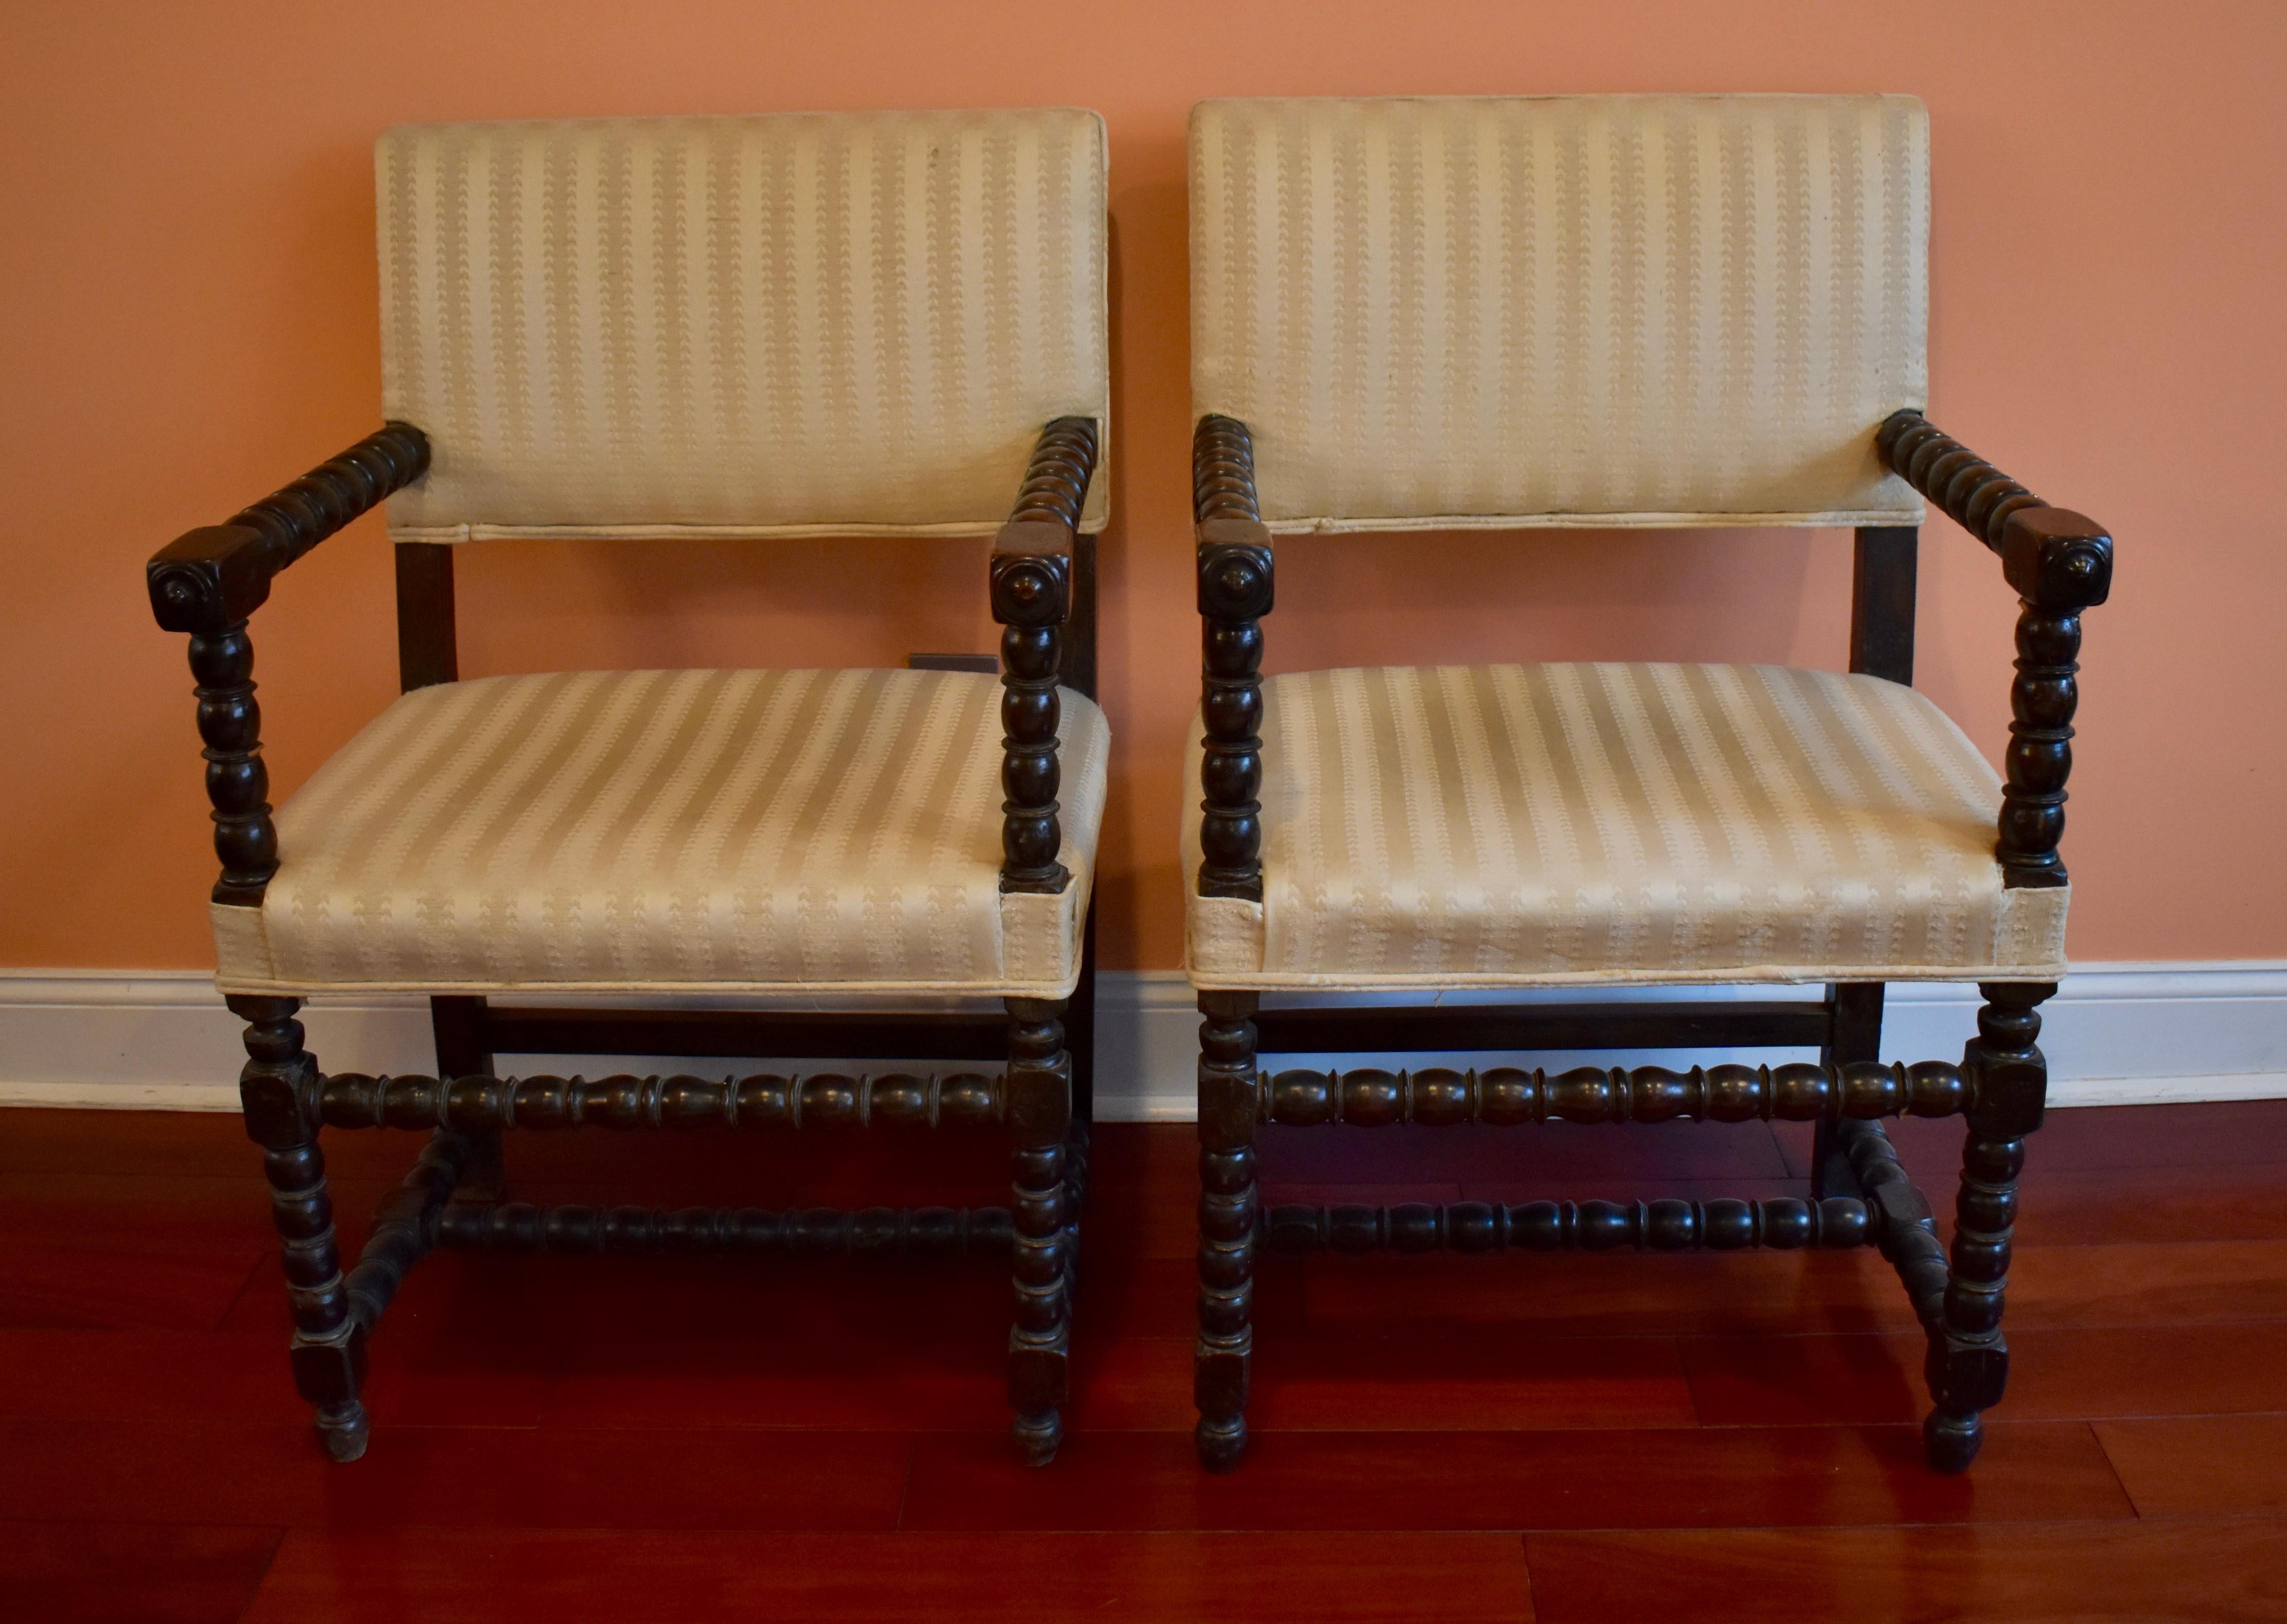 A rare pair of early 19th century New York, turned wood side chairs, in the Dutch Colonial style. Constructed of an ebonized wood, and styled with spindle turned arms and supports, terminating in spindle turned legs and stretchers. 

Heavy, sturdy